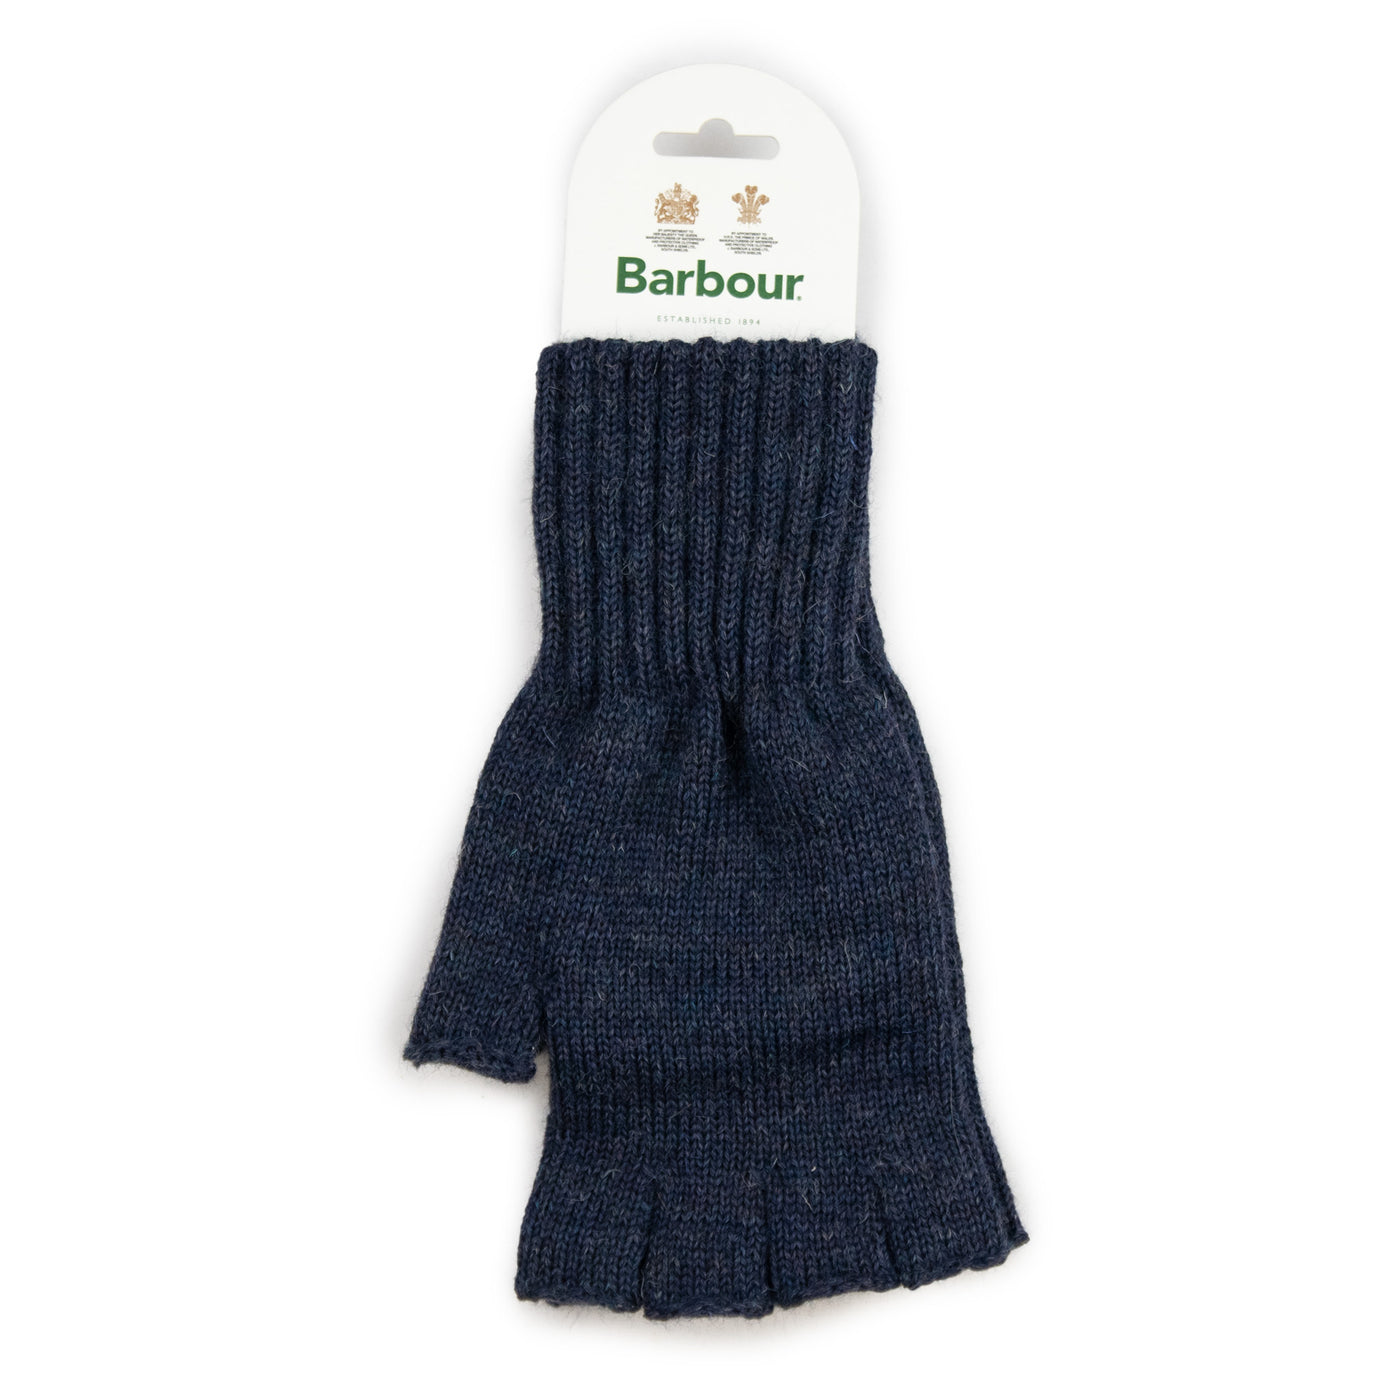 Barbour Fingerless Lambswool Gloves Made in Scotland Navy Blue